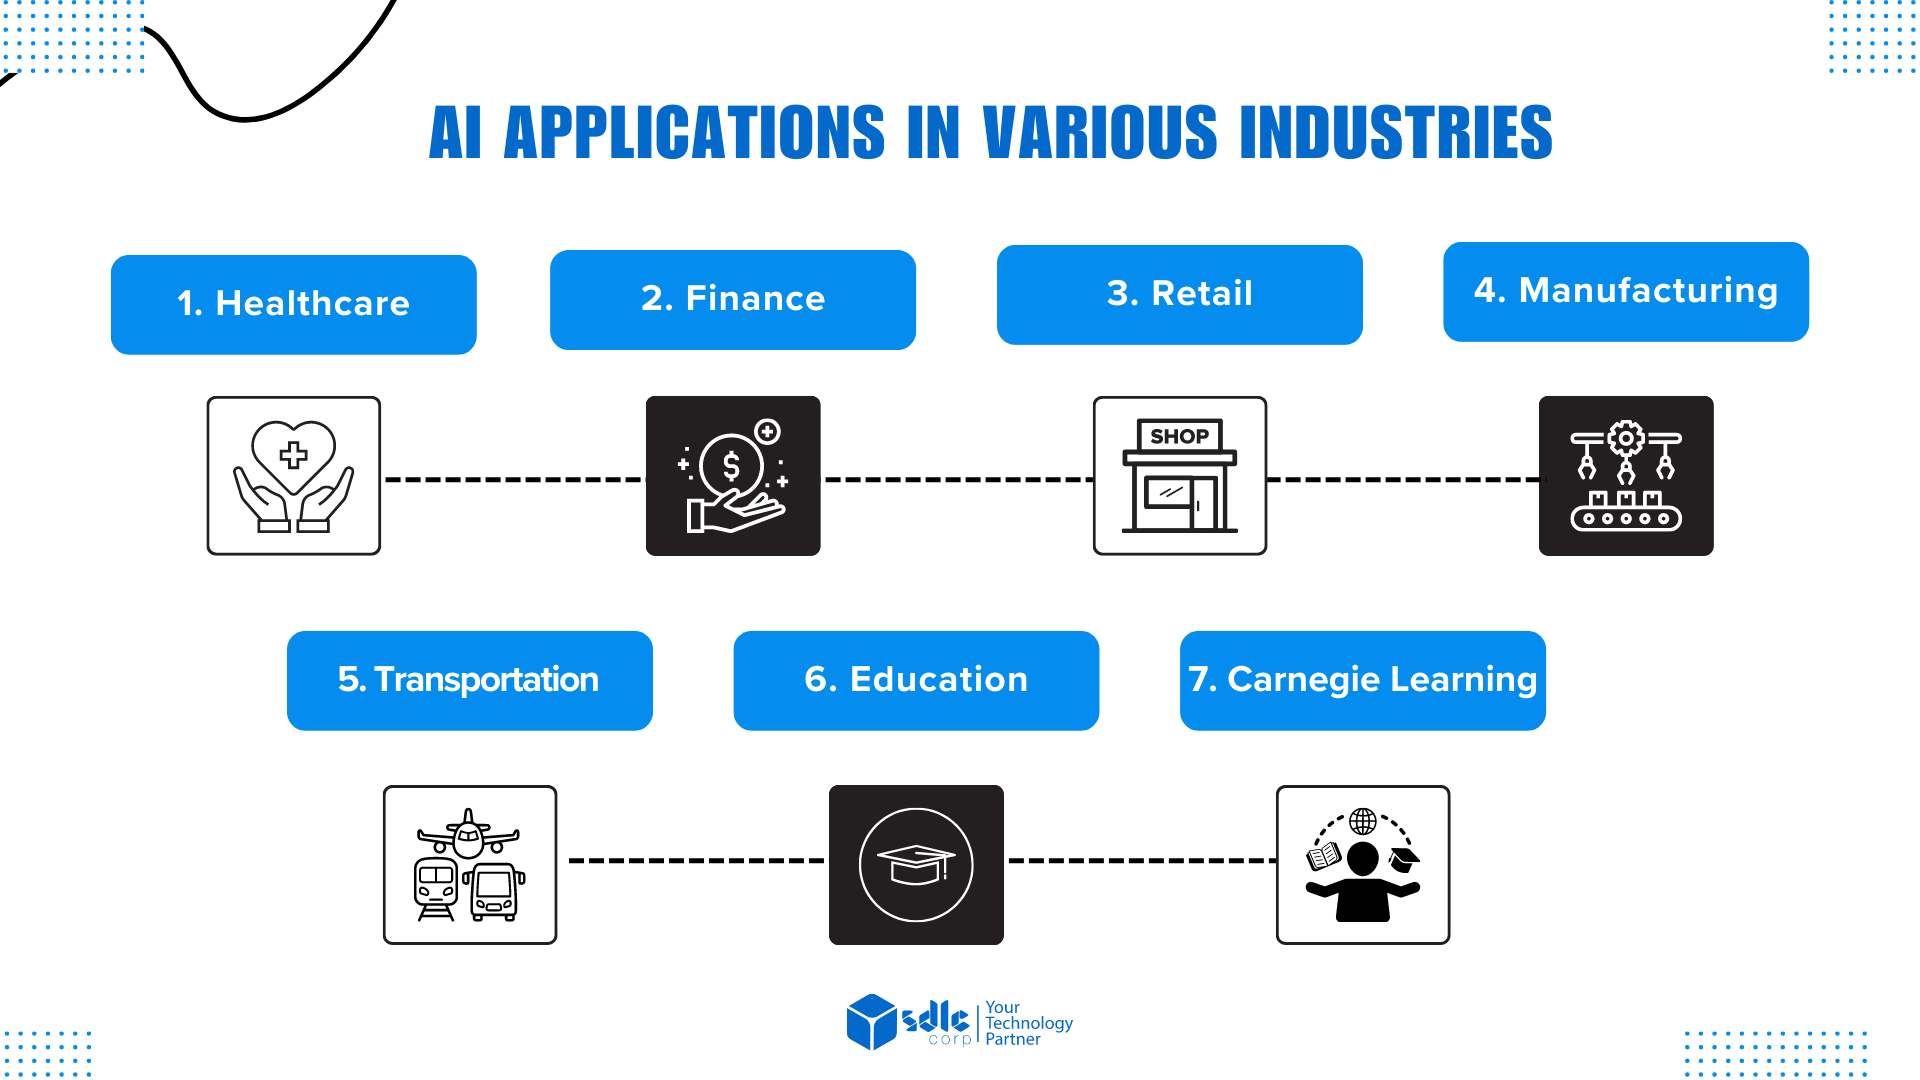 AI Applications in various Industries